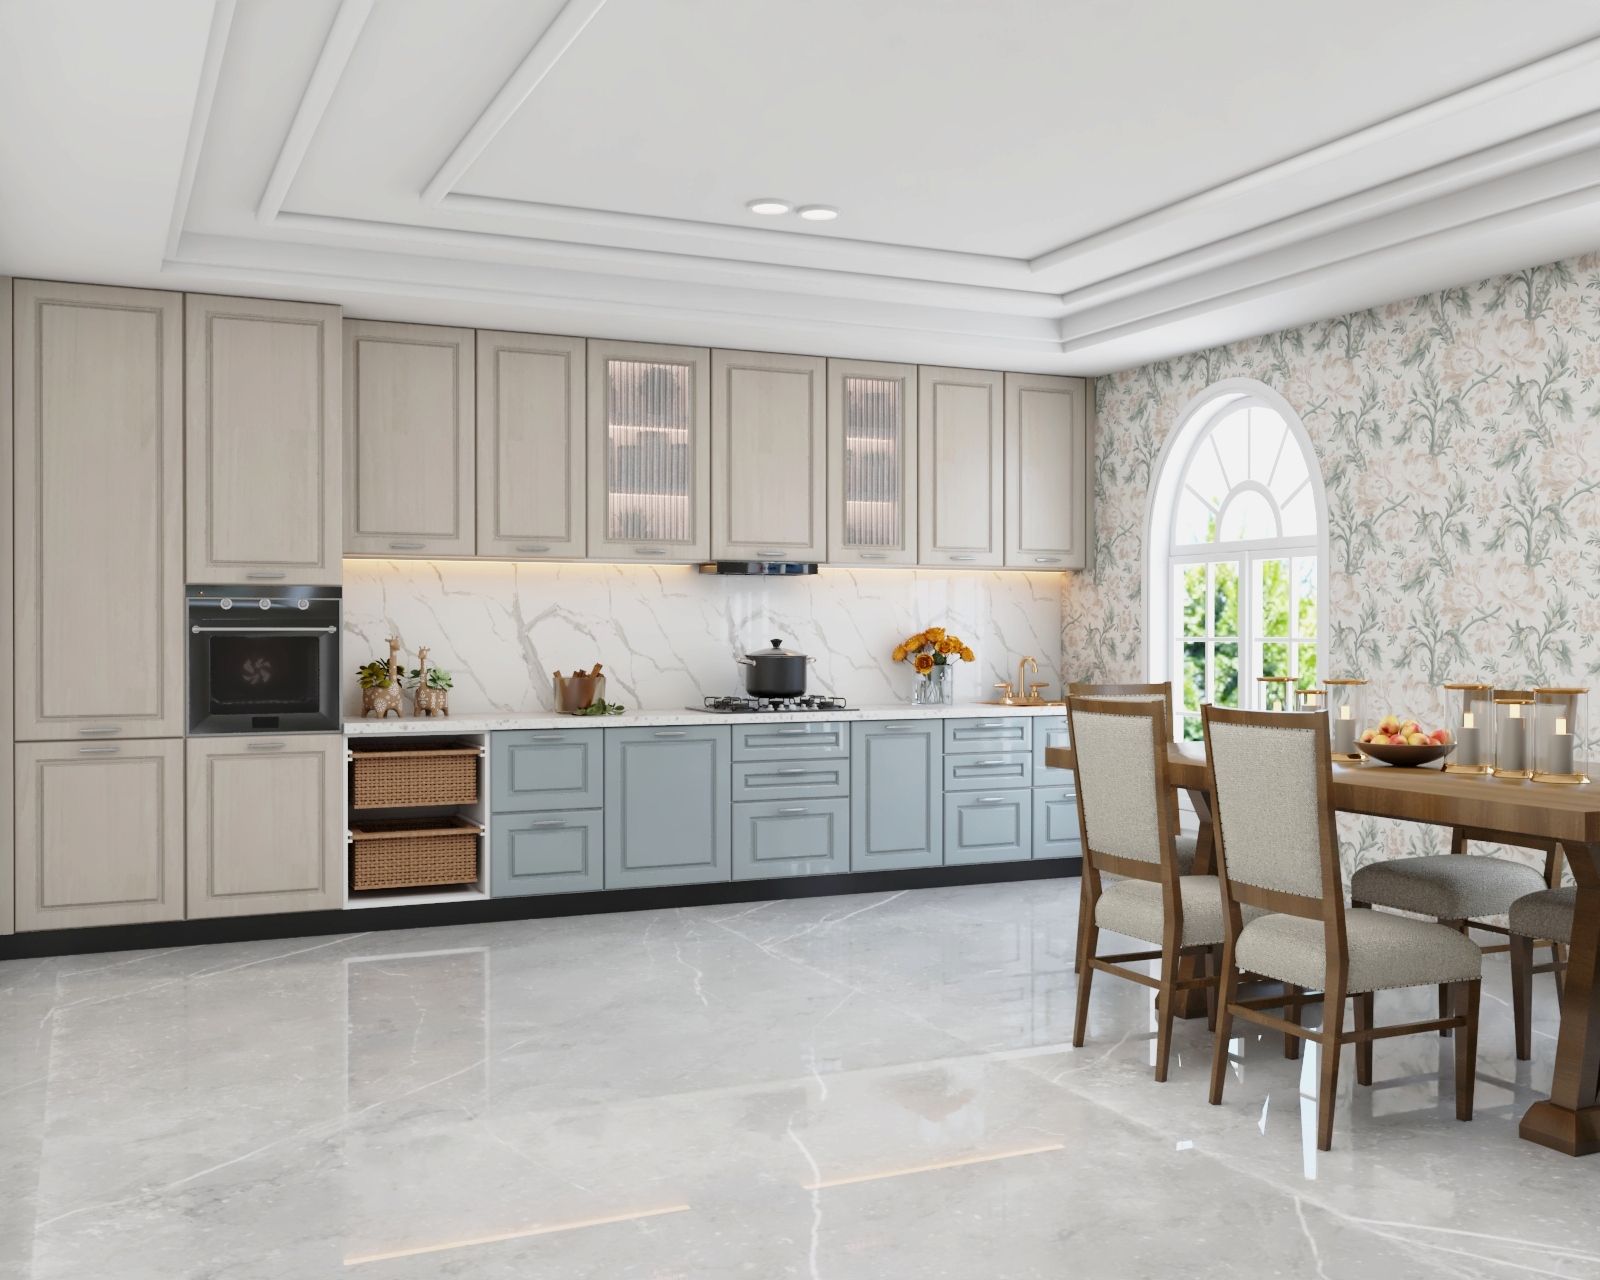 Modern Classic Modular Straight Kitchen Design In Beige And Blue With A Marble Countertop